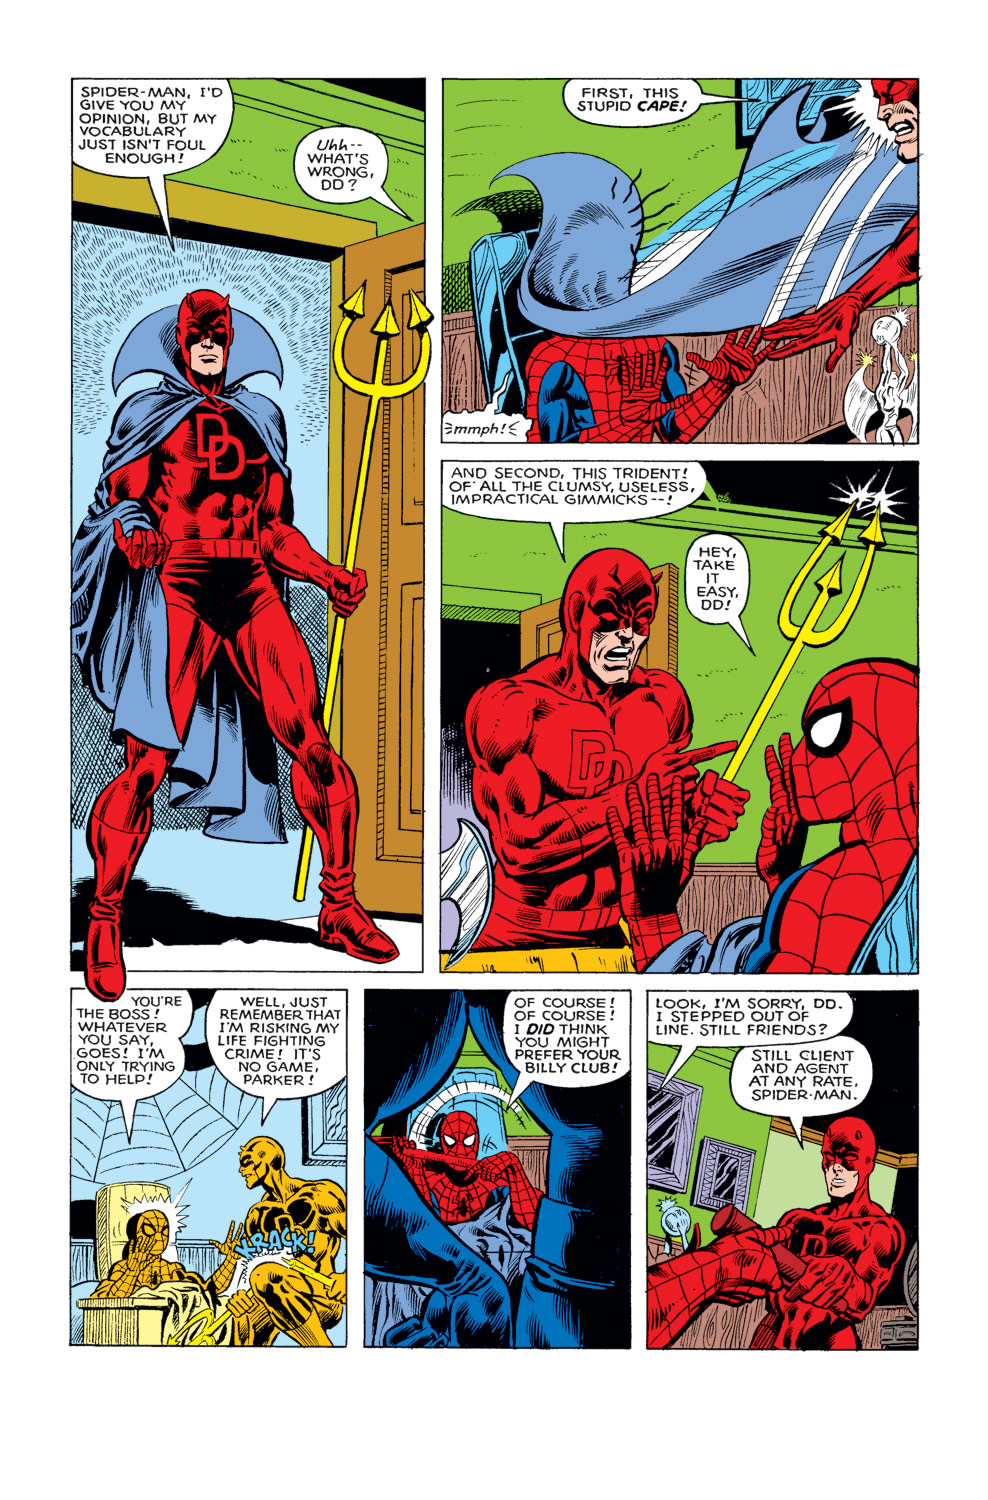 What If? (1977) issue 19 - Spider-Man had never become a crimefighter - Page 18